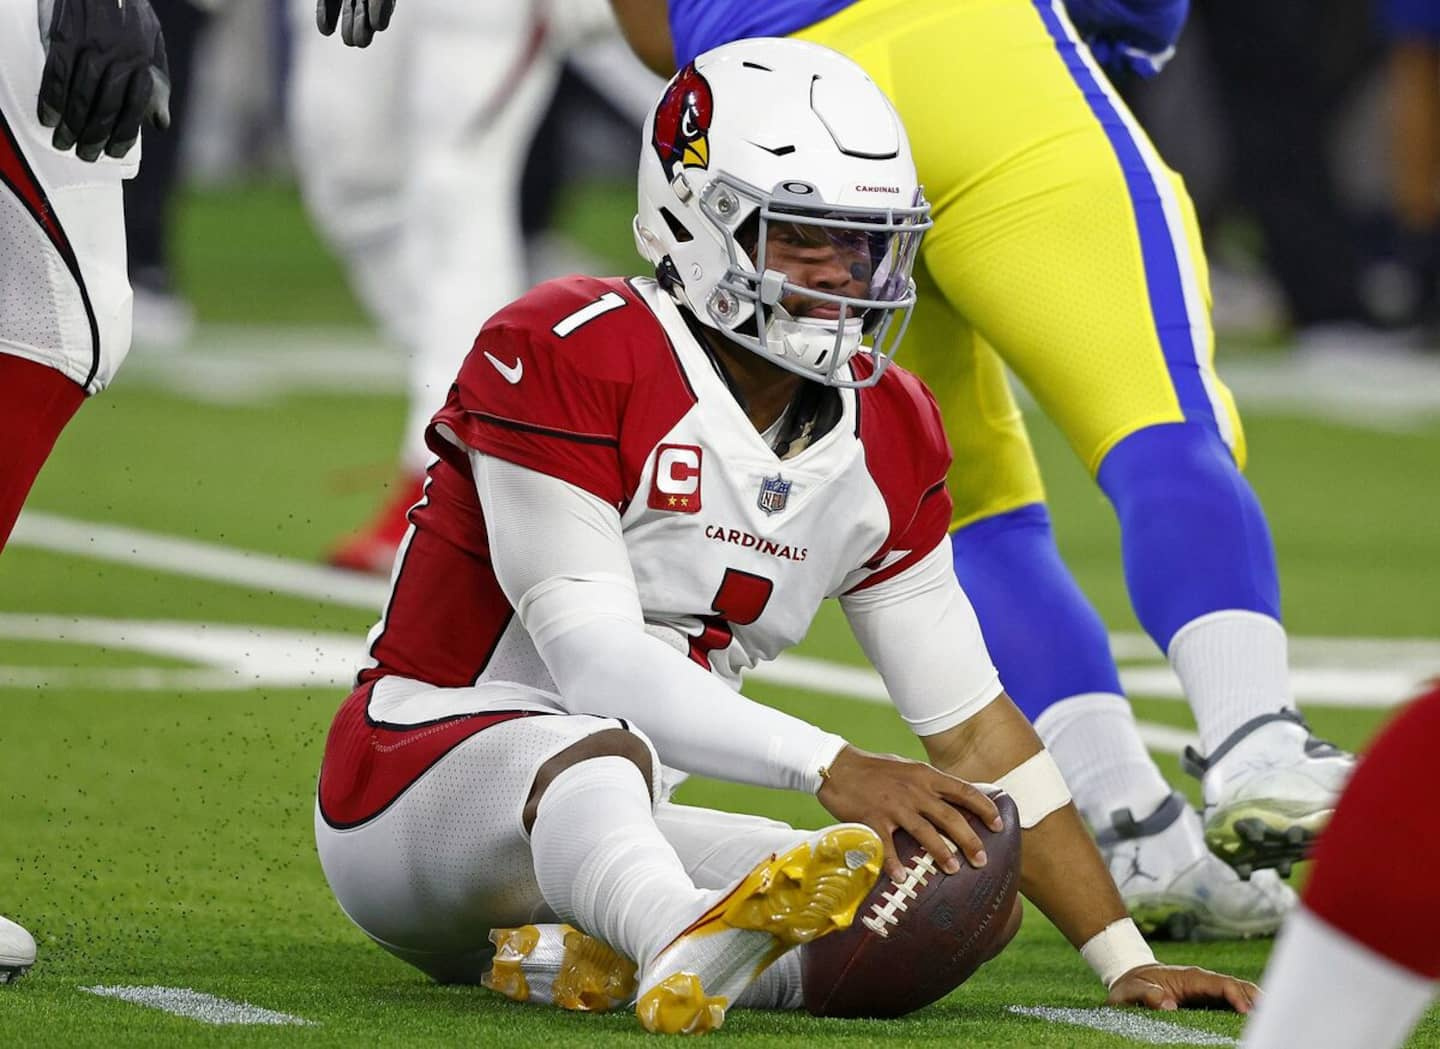 Kyler Murray affected by COVID-19